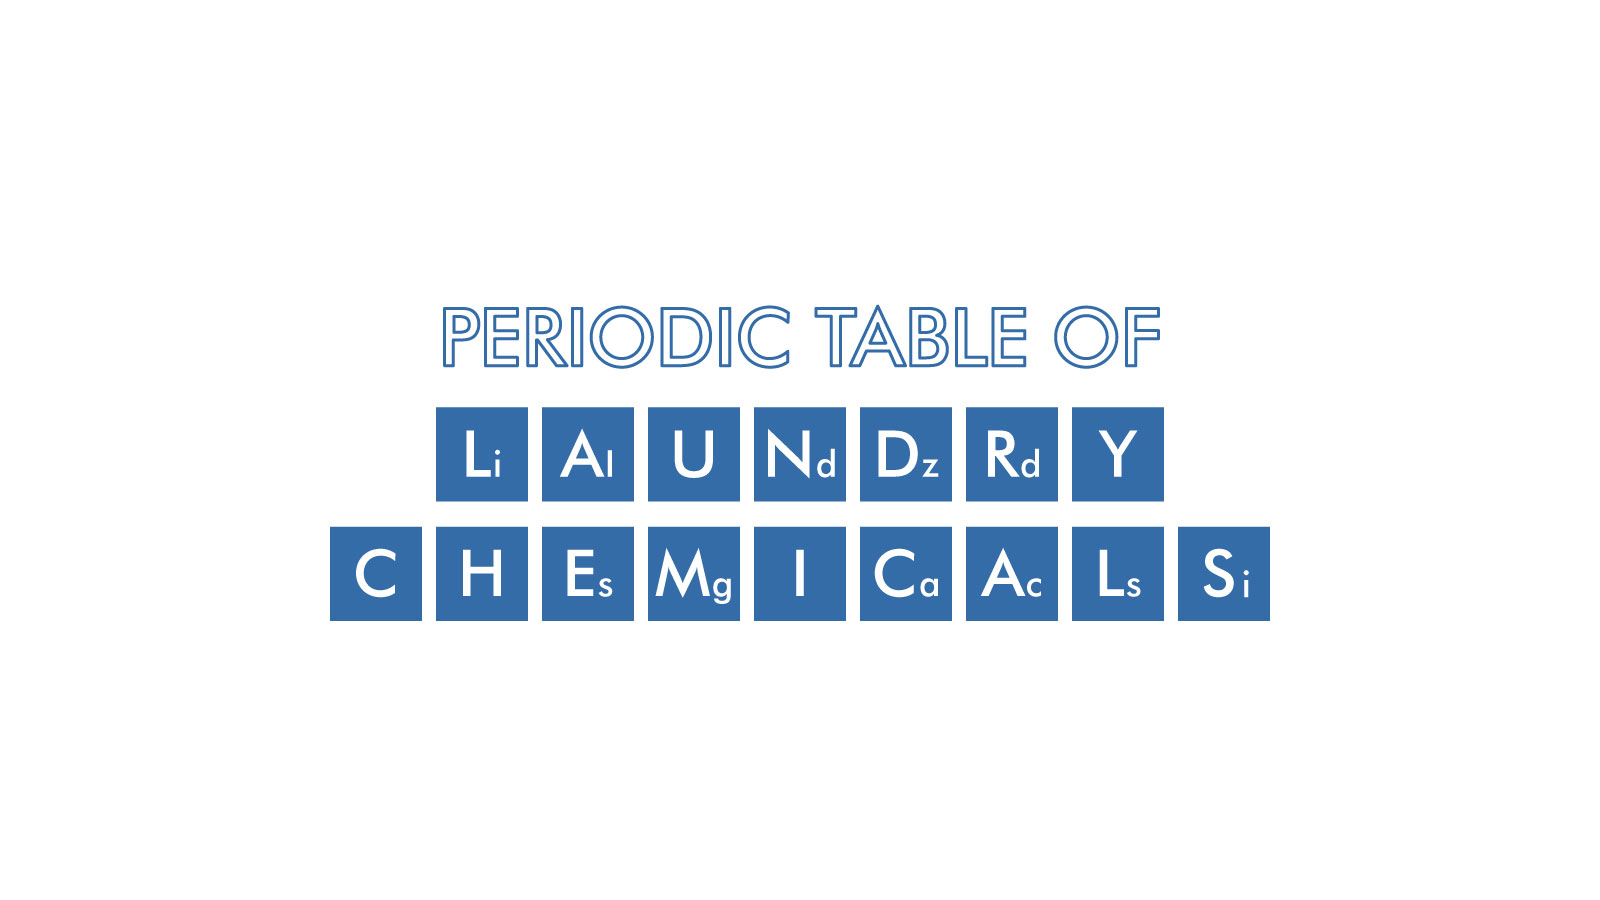 Design for Ideal Laundry Periodic Table